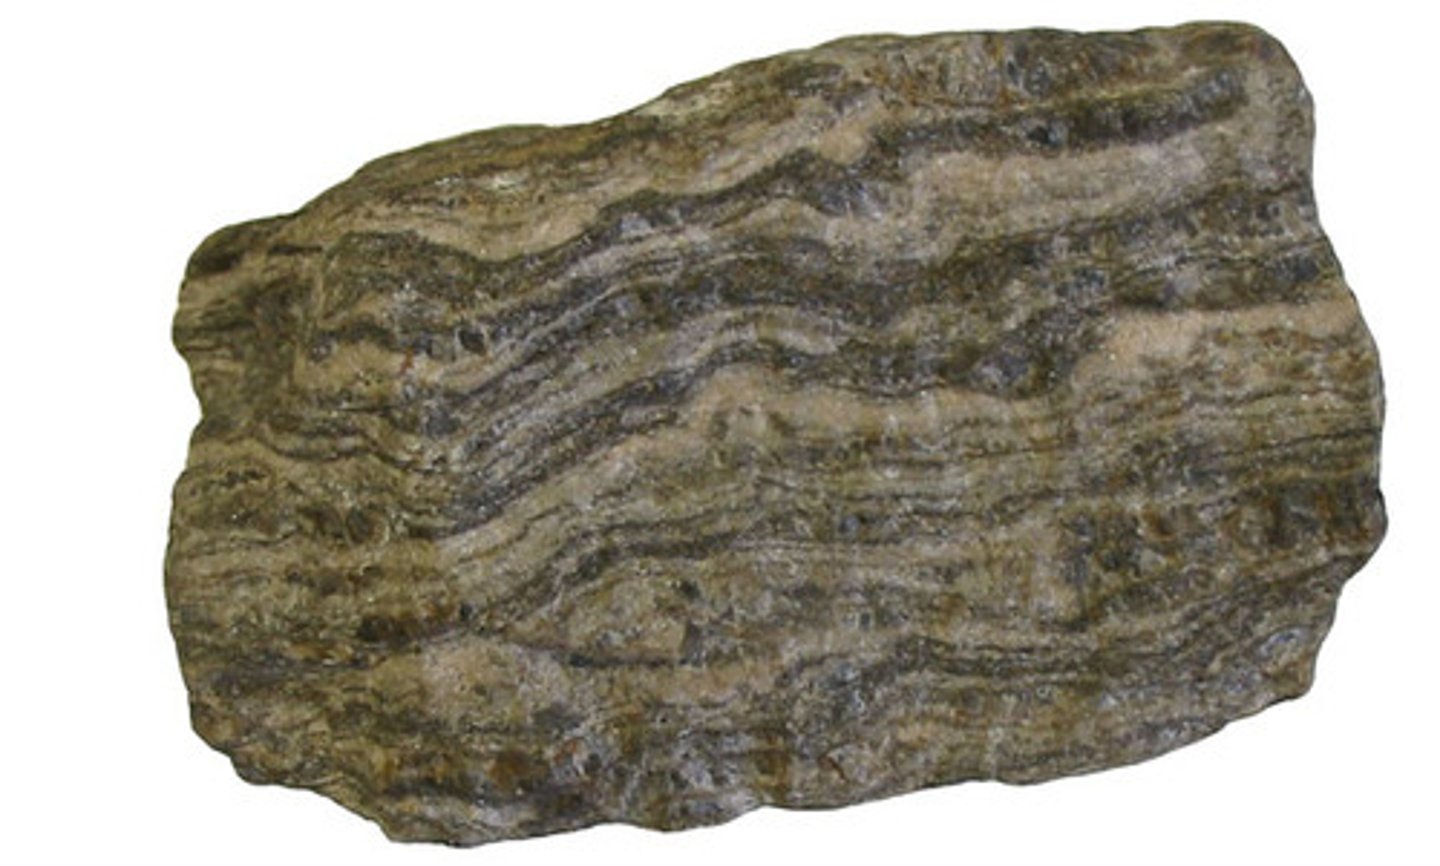 <p>A metamorphic rock with a texture that gives the rock a banded pattern (see image).</p>